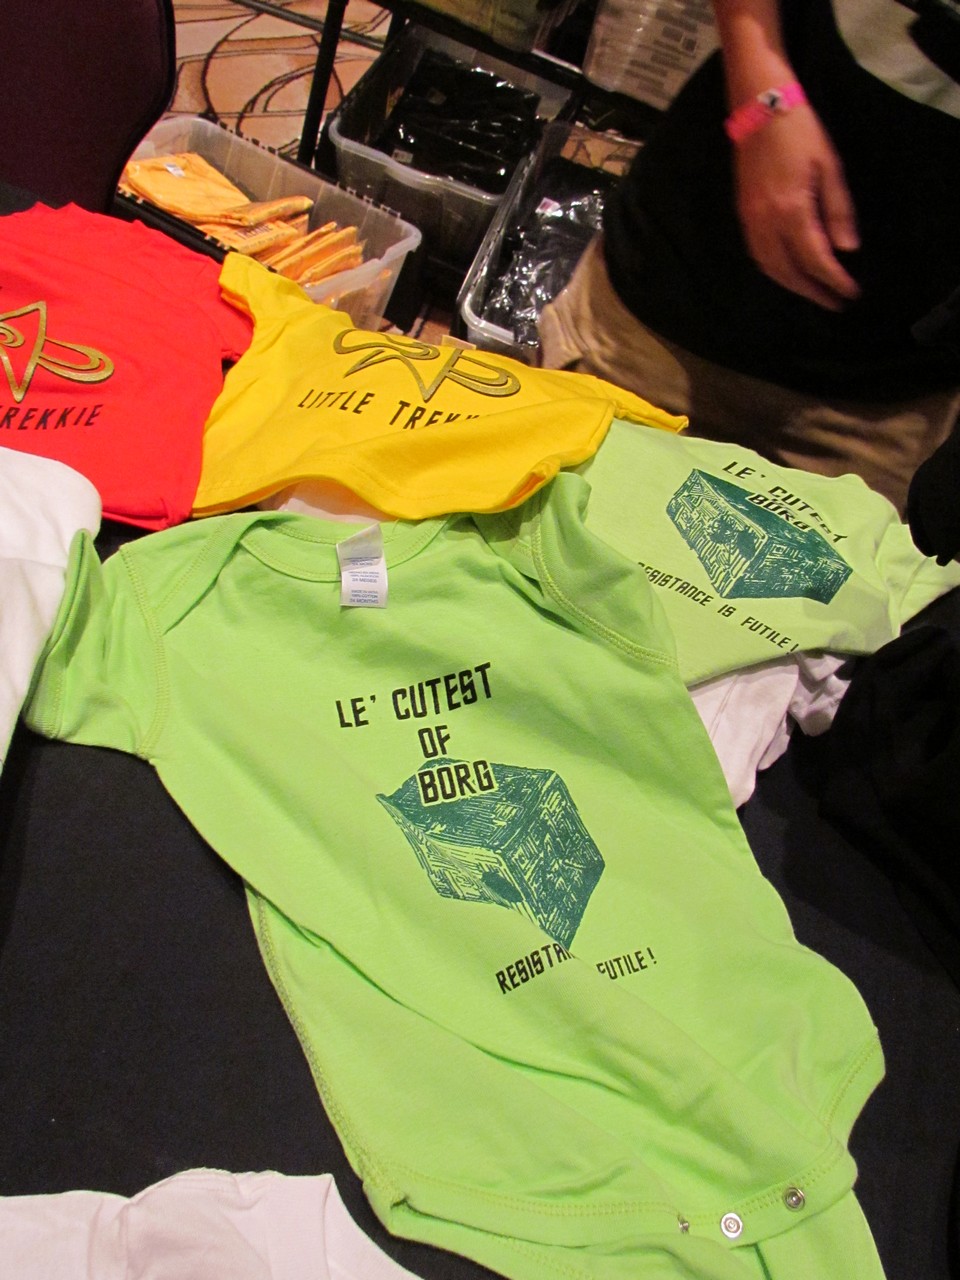 STLV12: First Looks and Cool Stuff From The Vegas Con Vendors Room ...